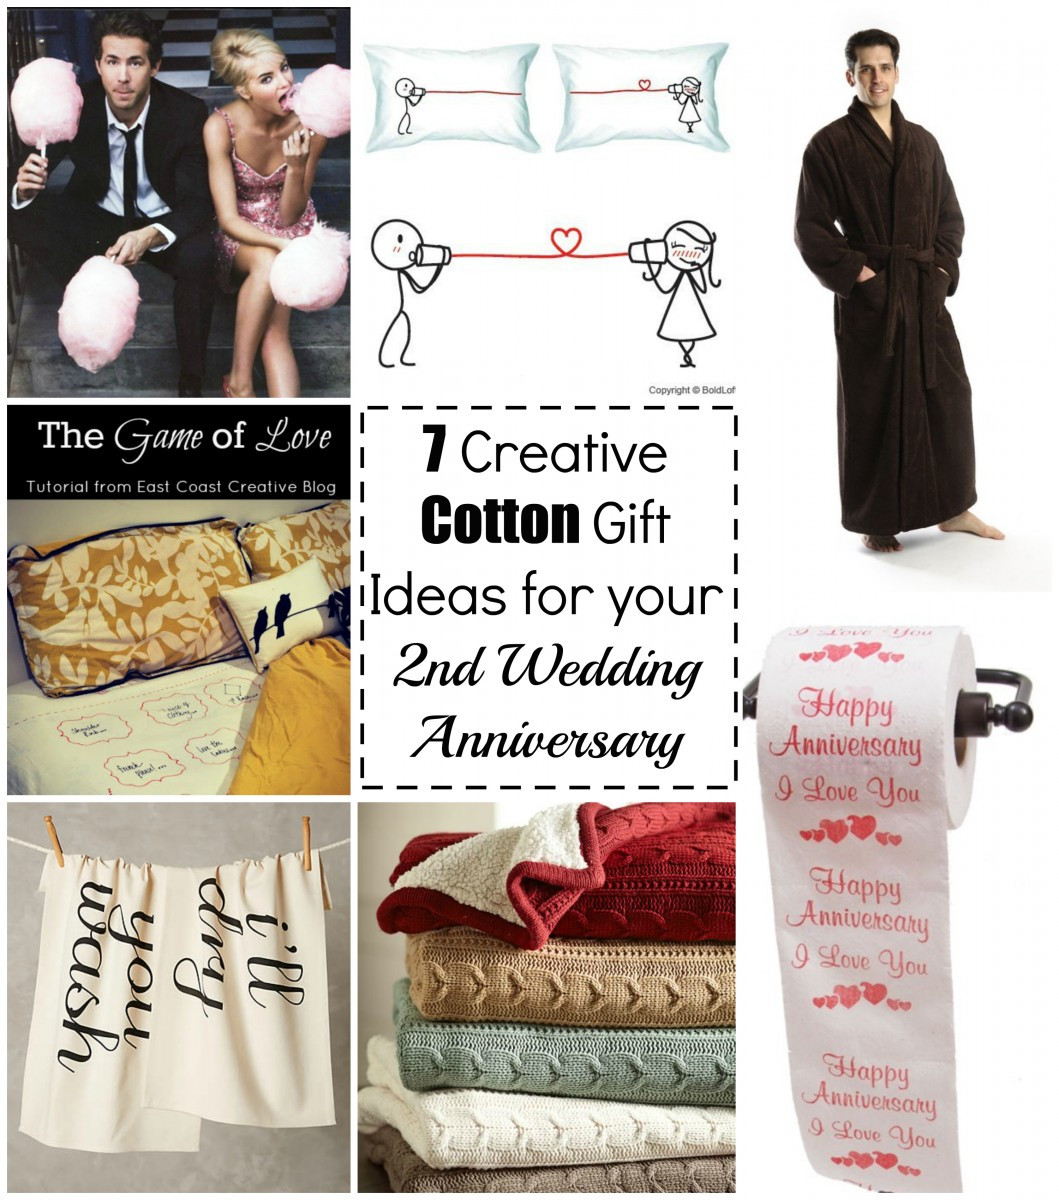 Cotton Anniversary Gift Ideas
 7 Cotton Gift Ideas for your 2nd Wedding Anniversary